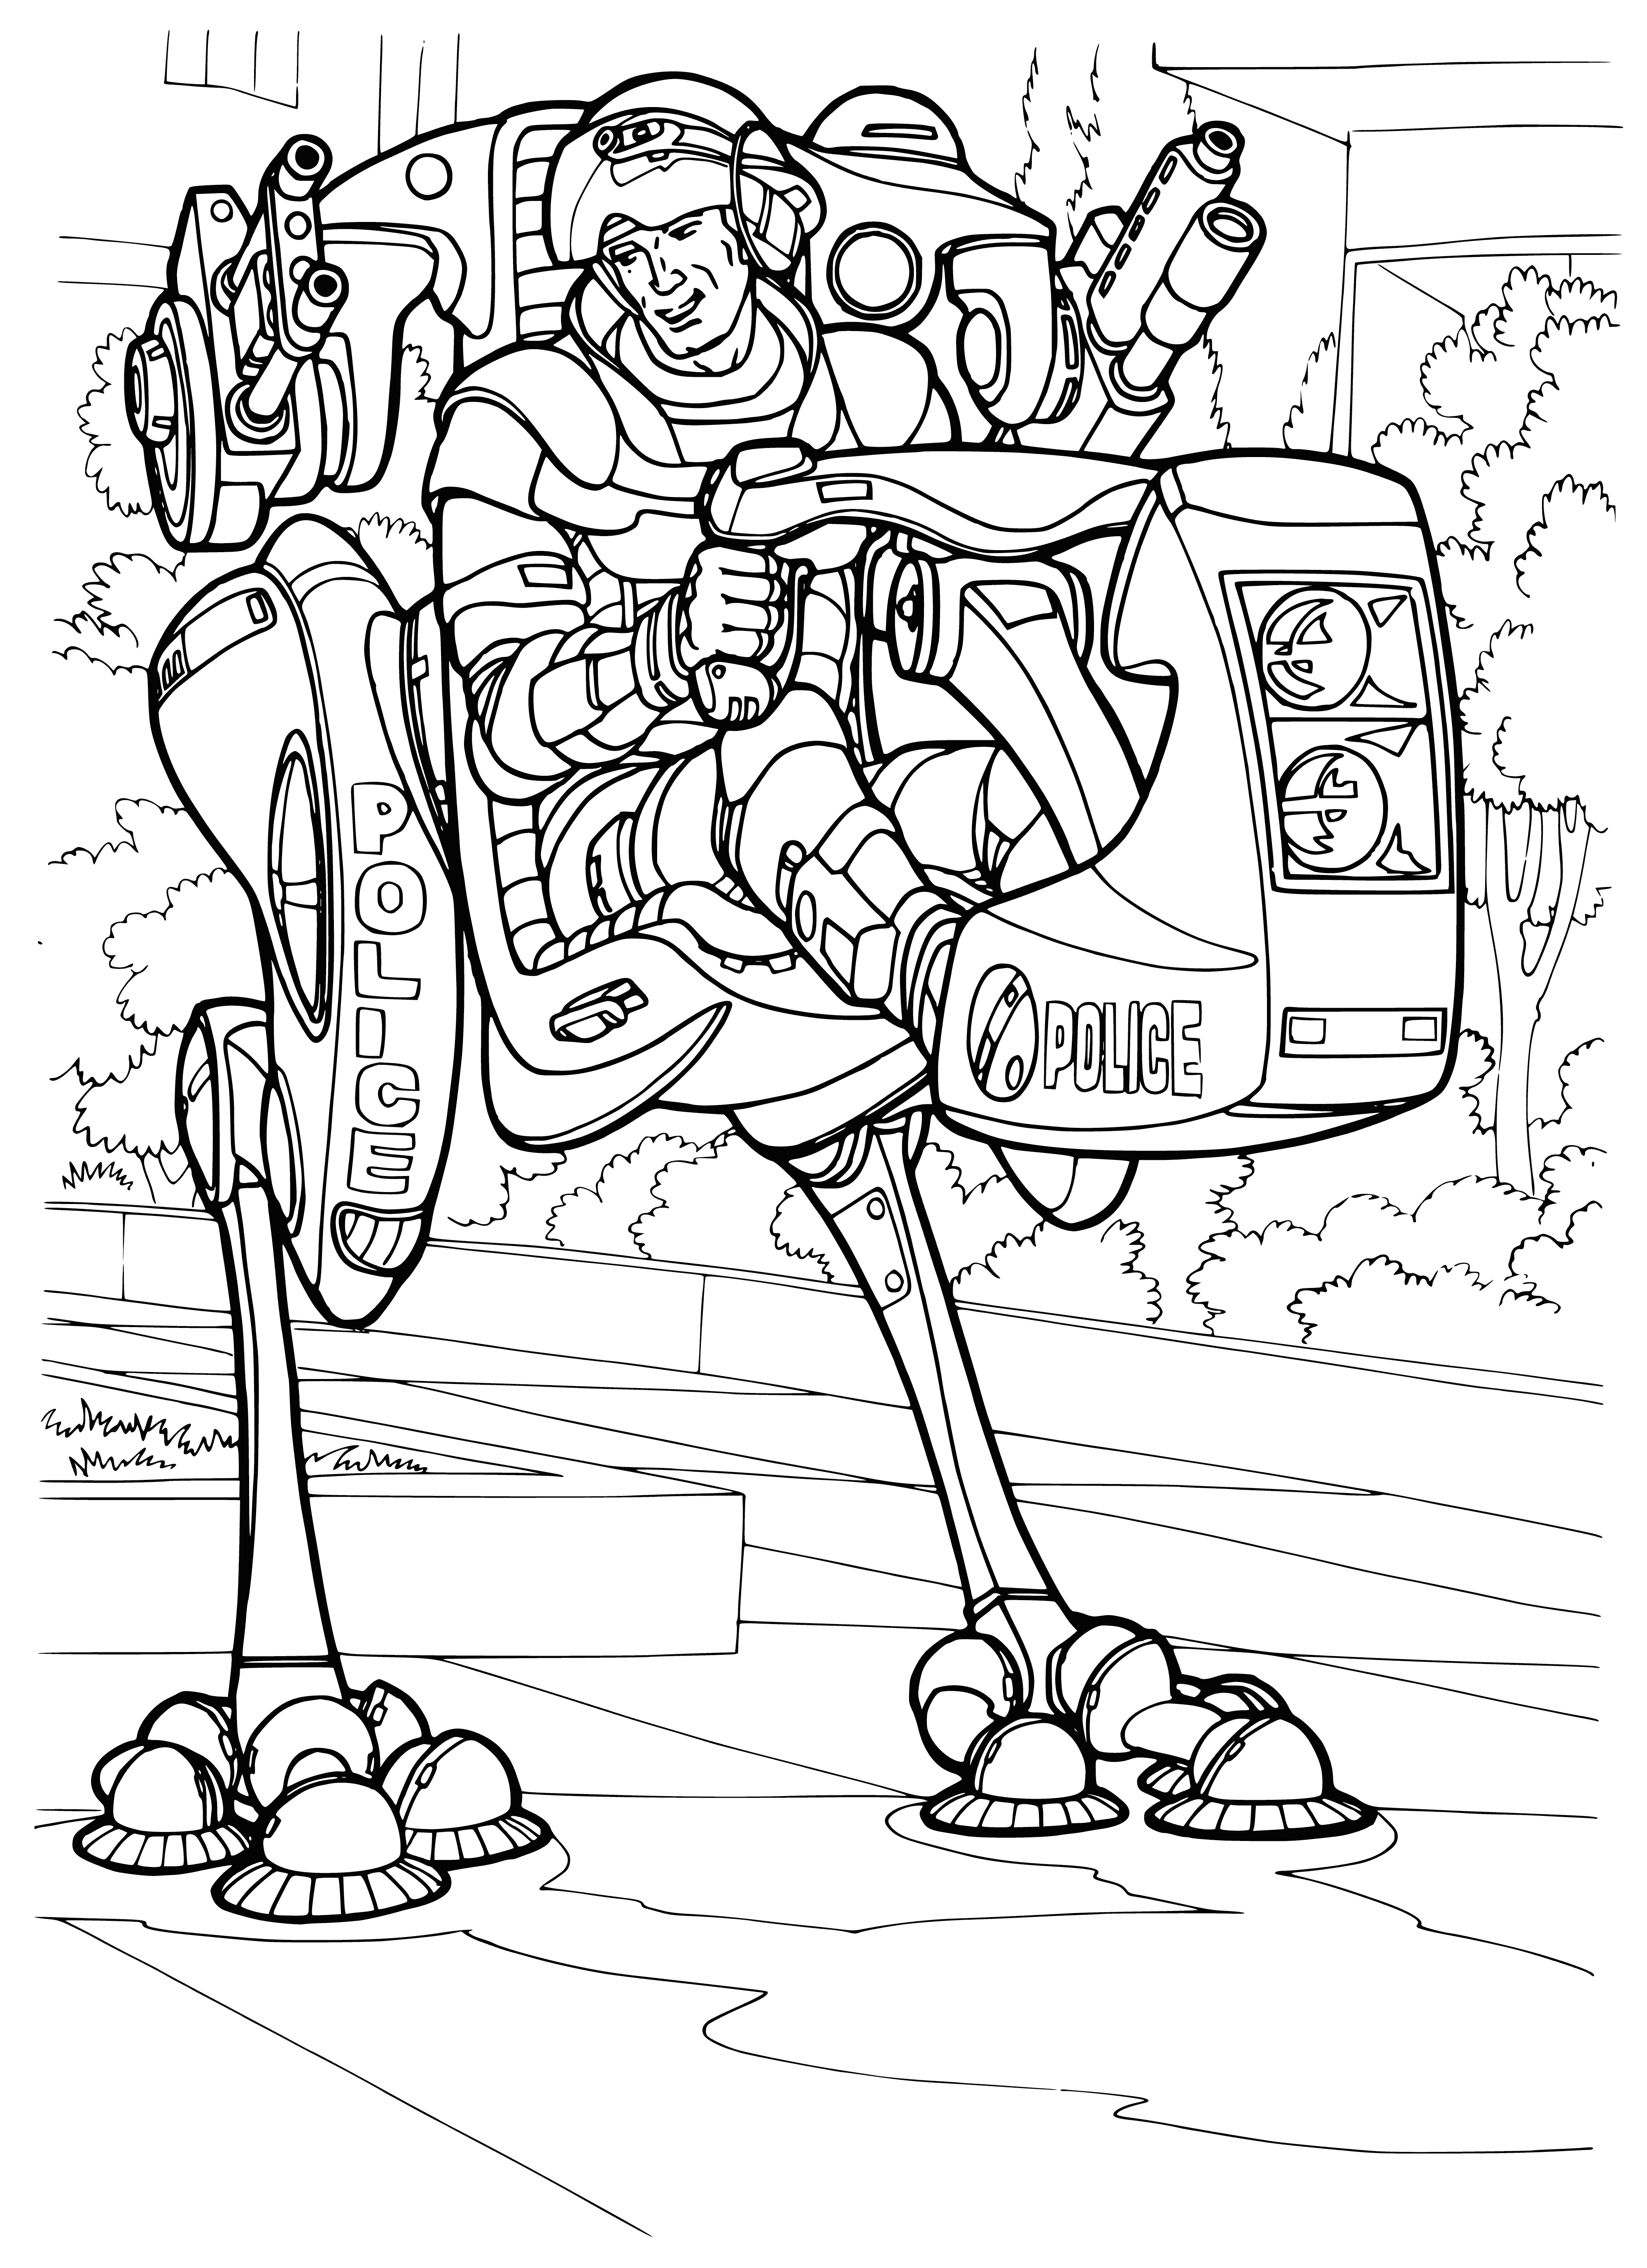 Walking police technician coloring page